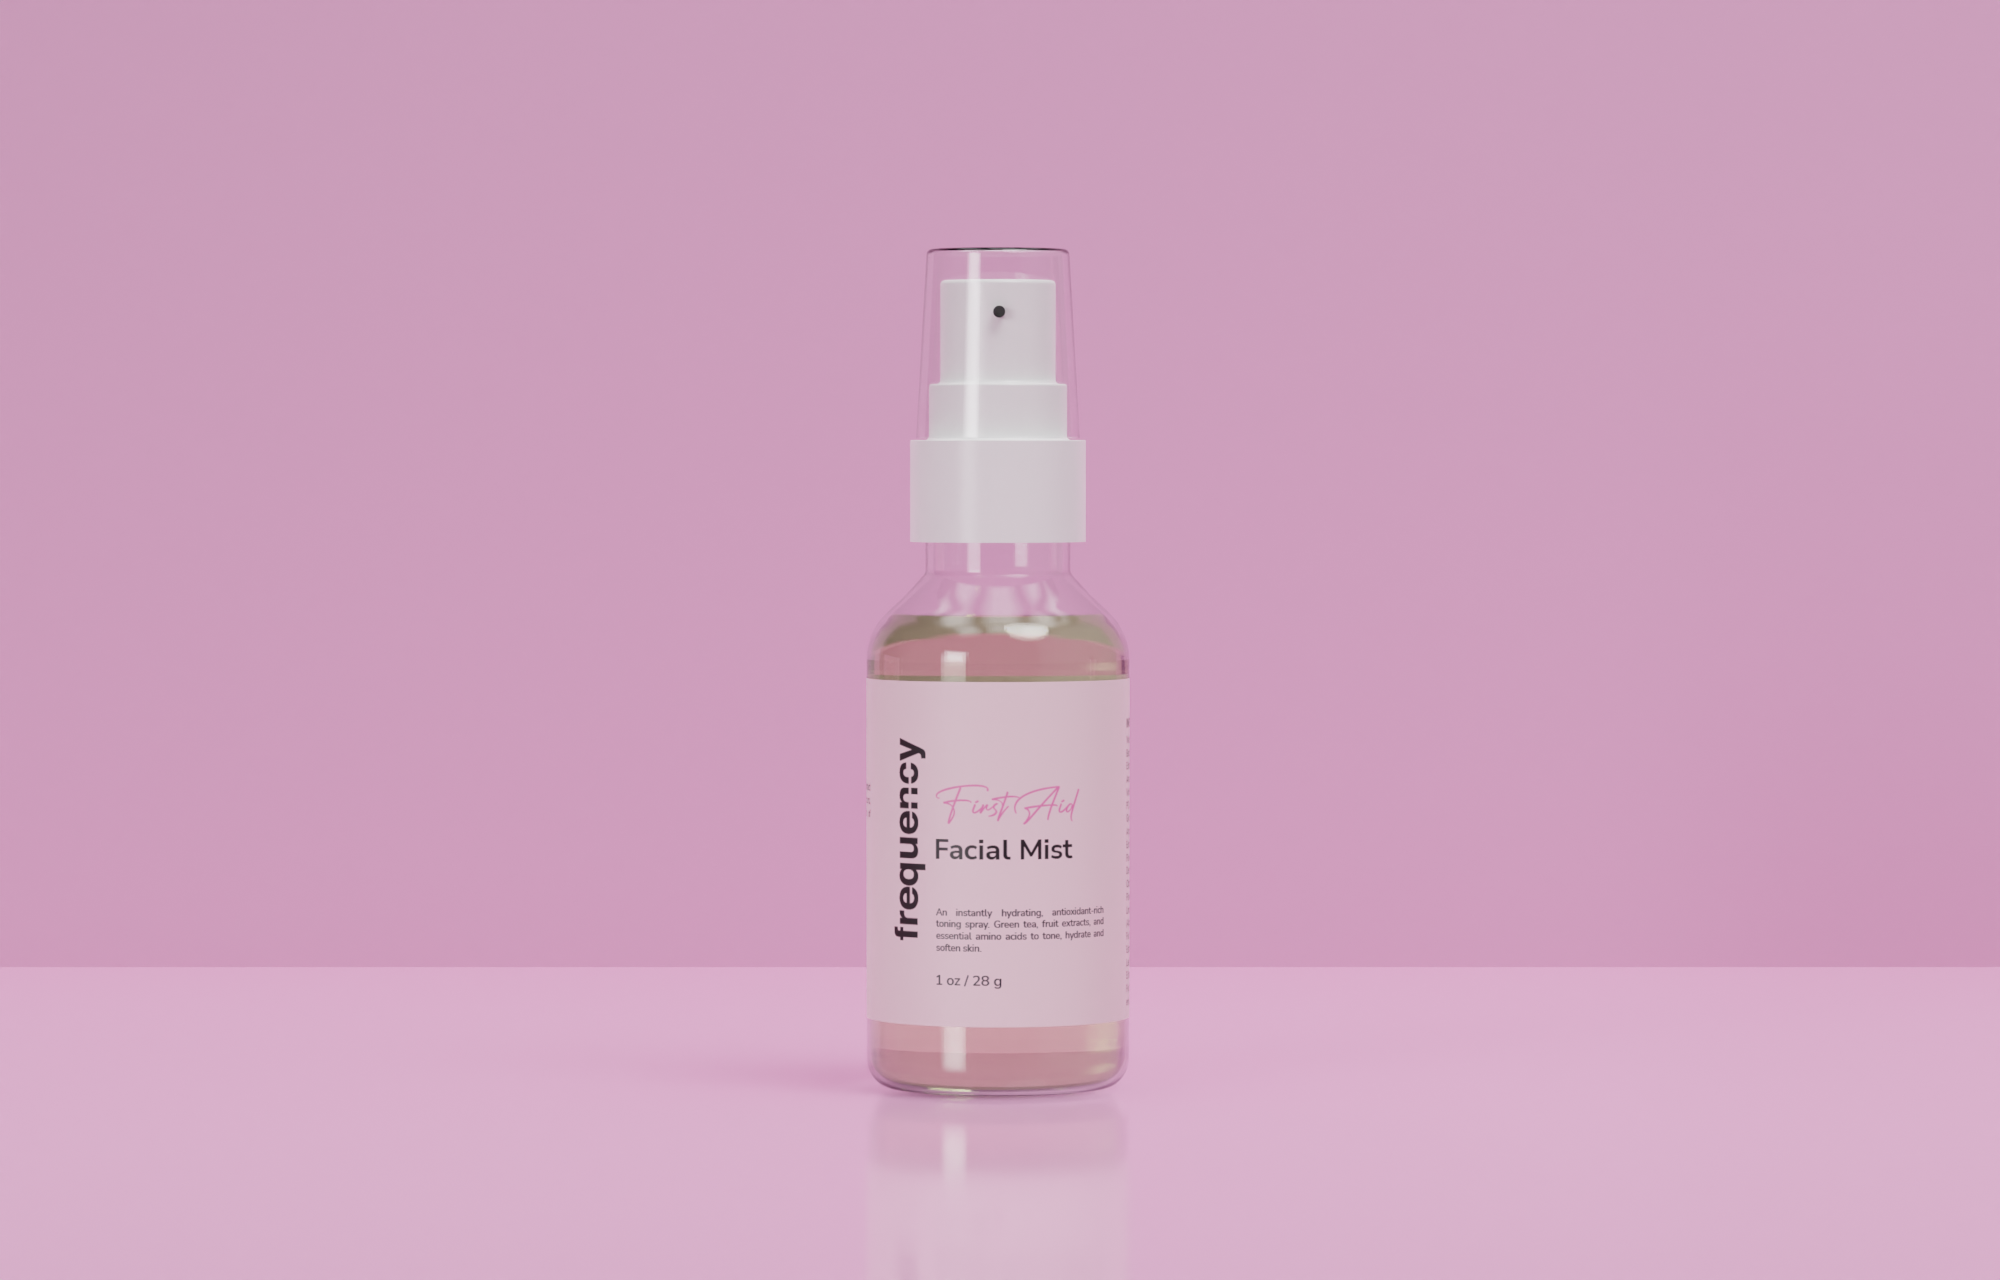 Frequency Skin First Aid Facial Mist